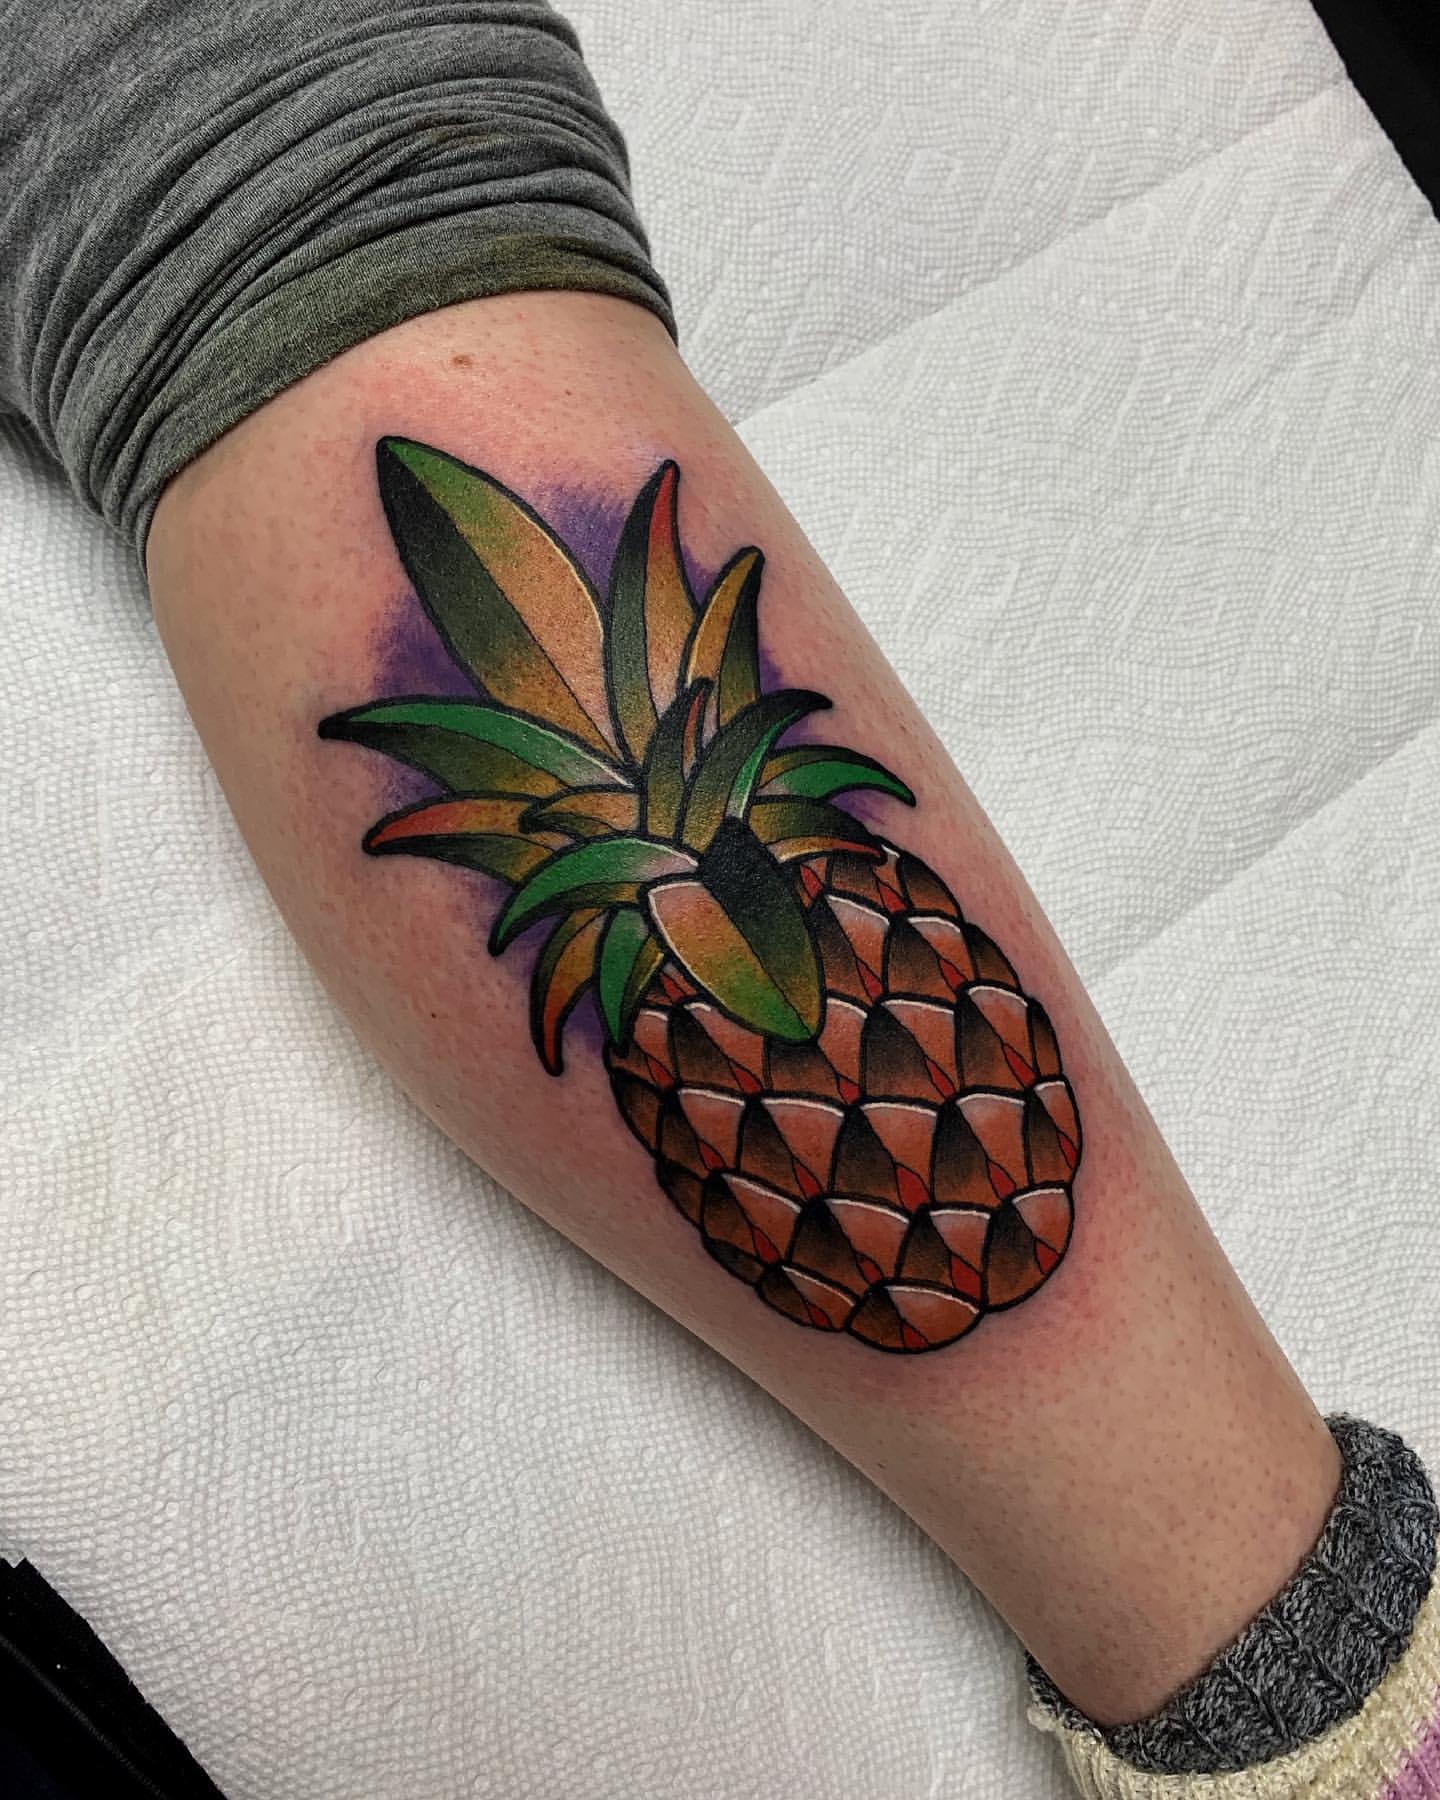 Pineapple Tattoos Are TrendingHere Are Our Favorites